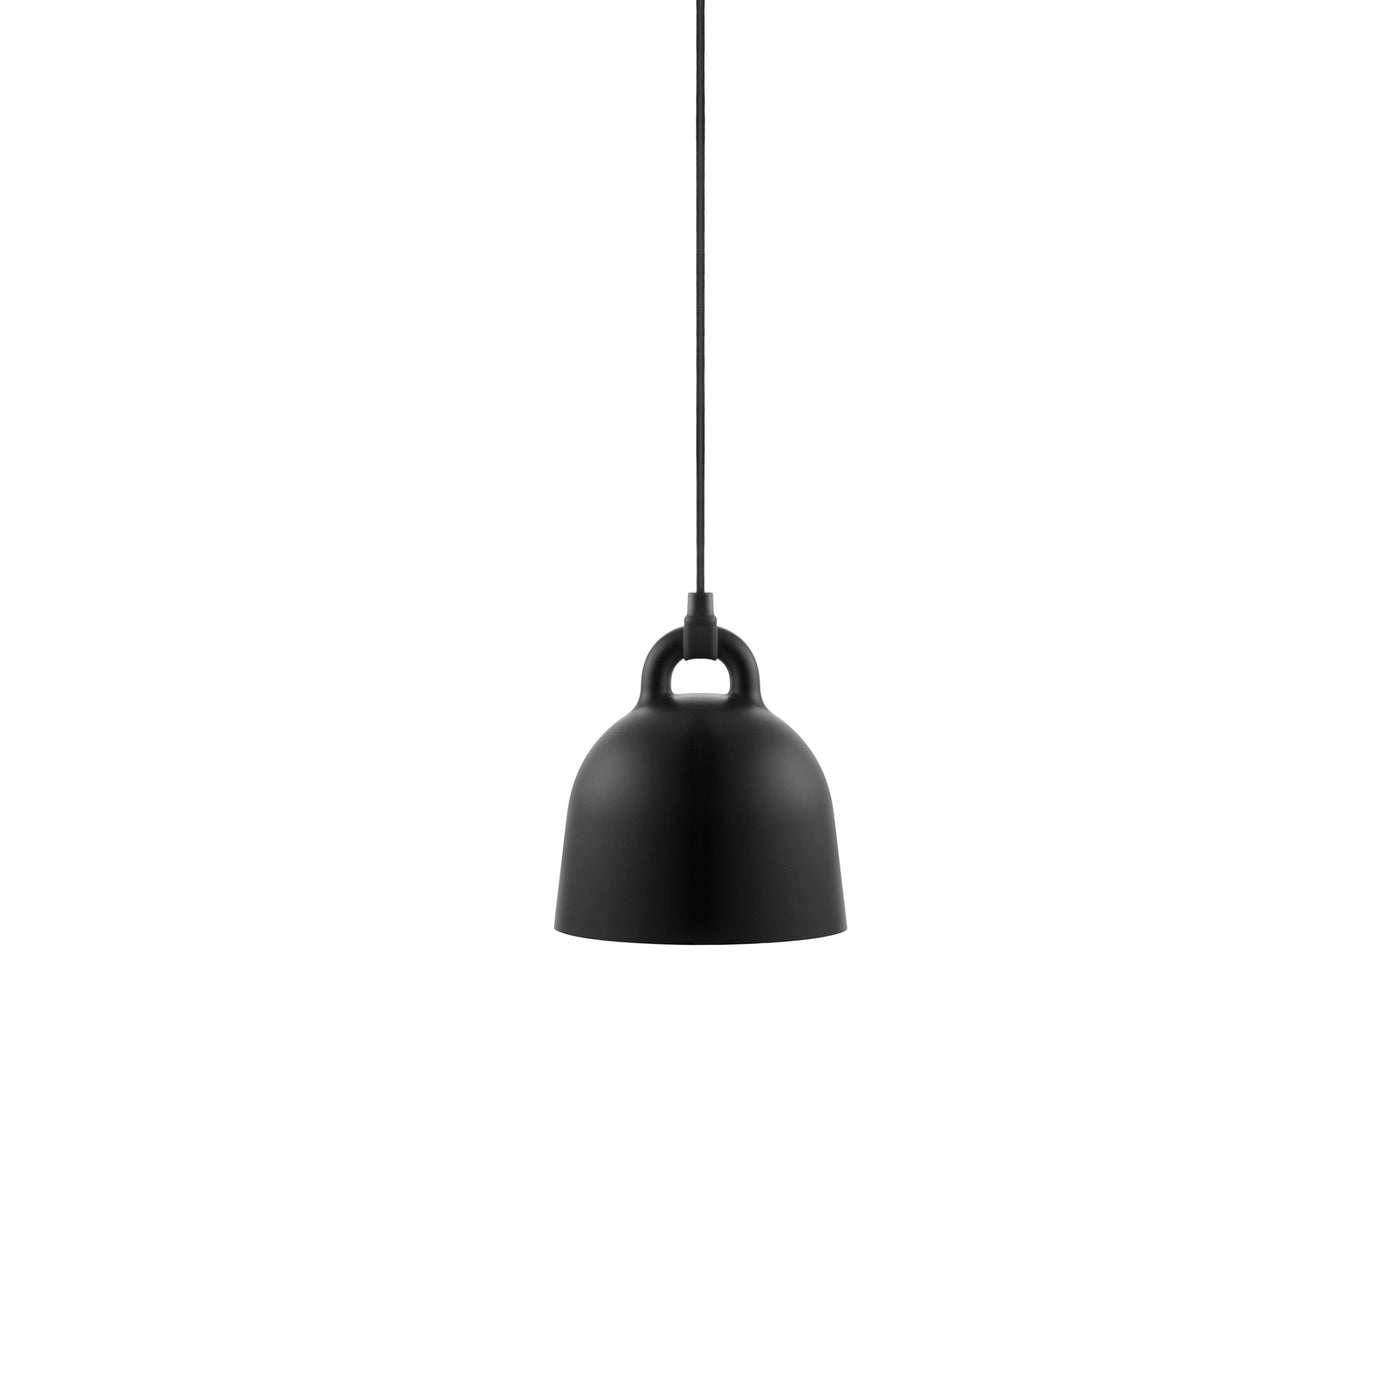 Norman Copenhagen Bell Pendant Lamp in black. Free UK delivery from someday designs #size_extra-small